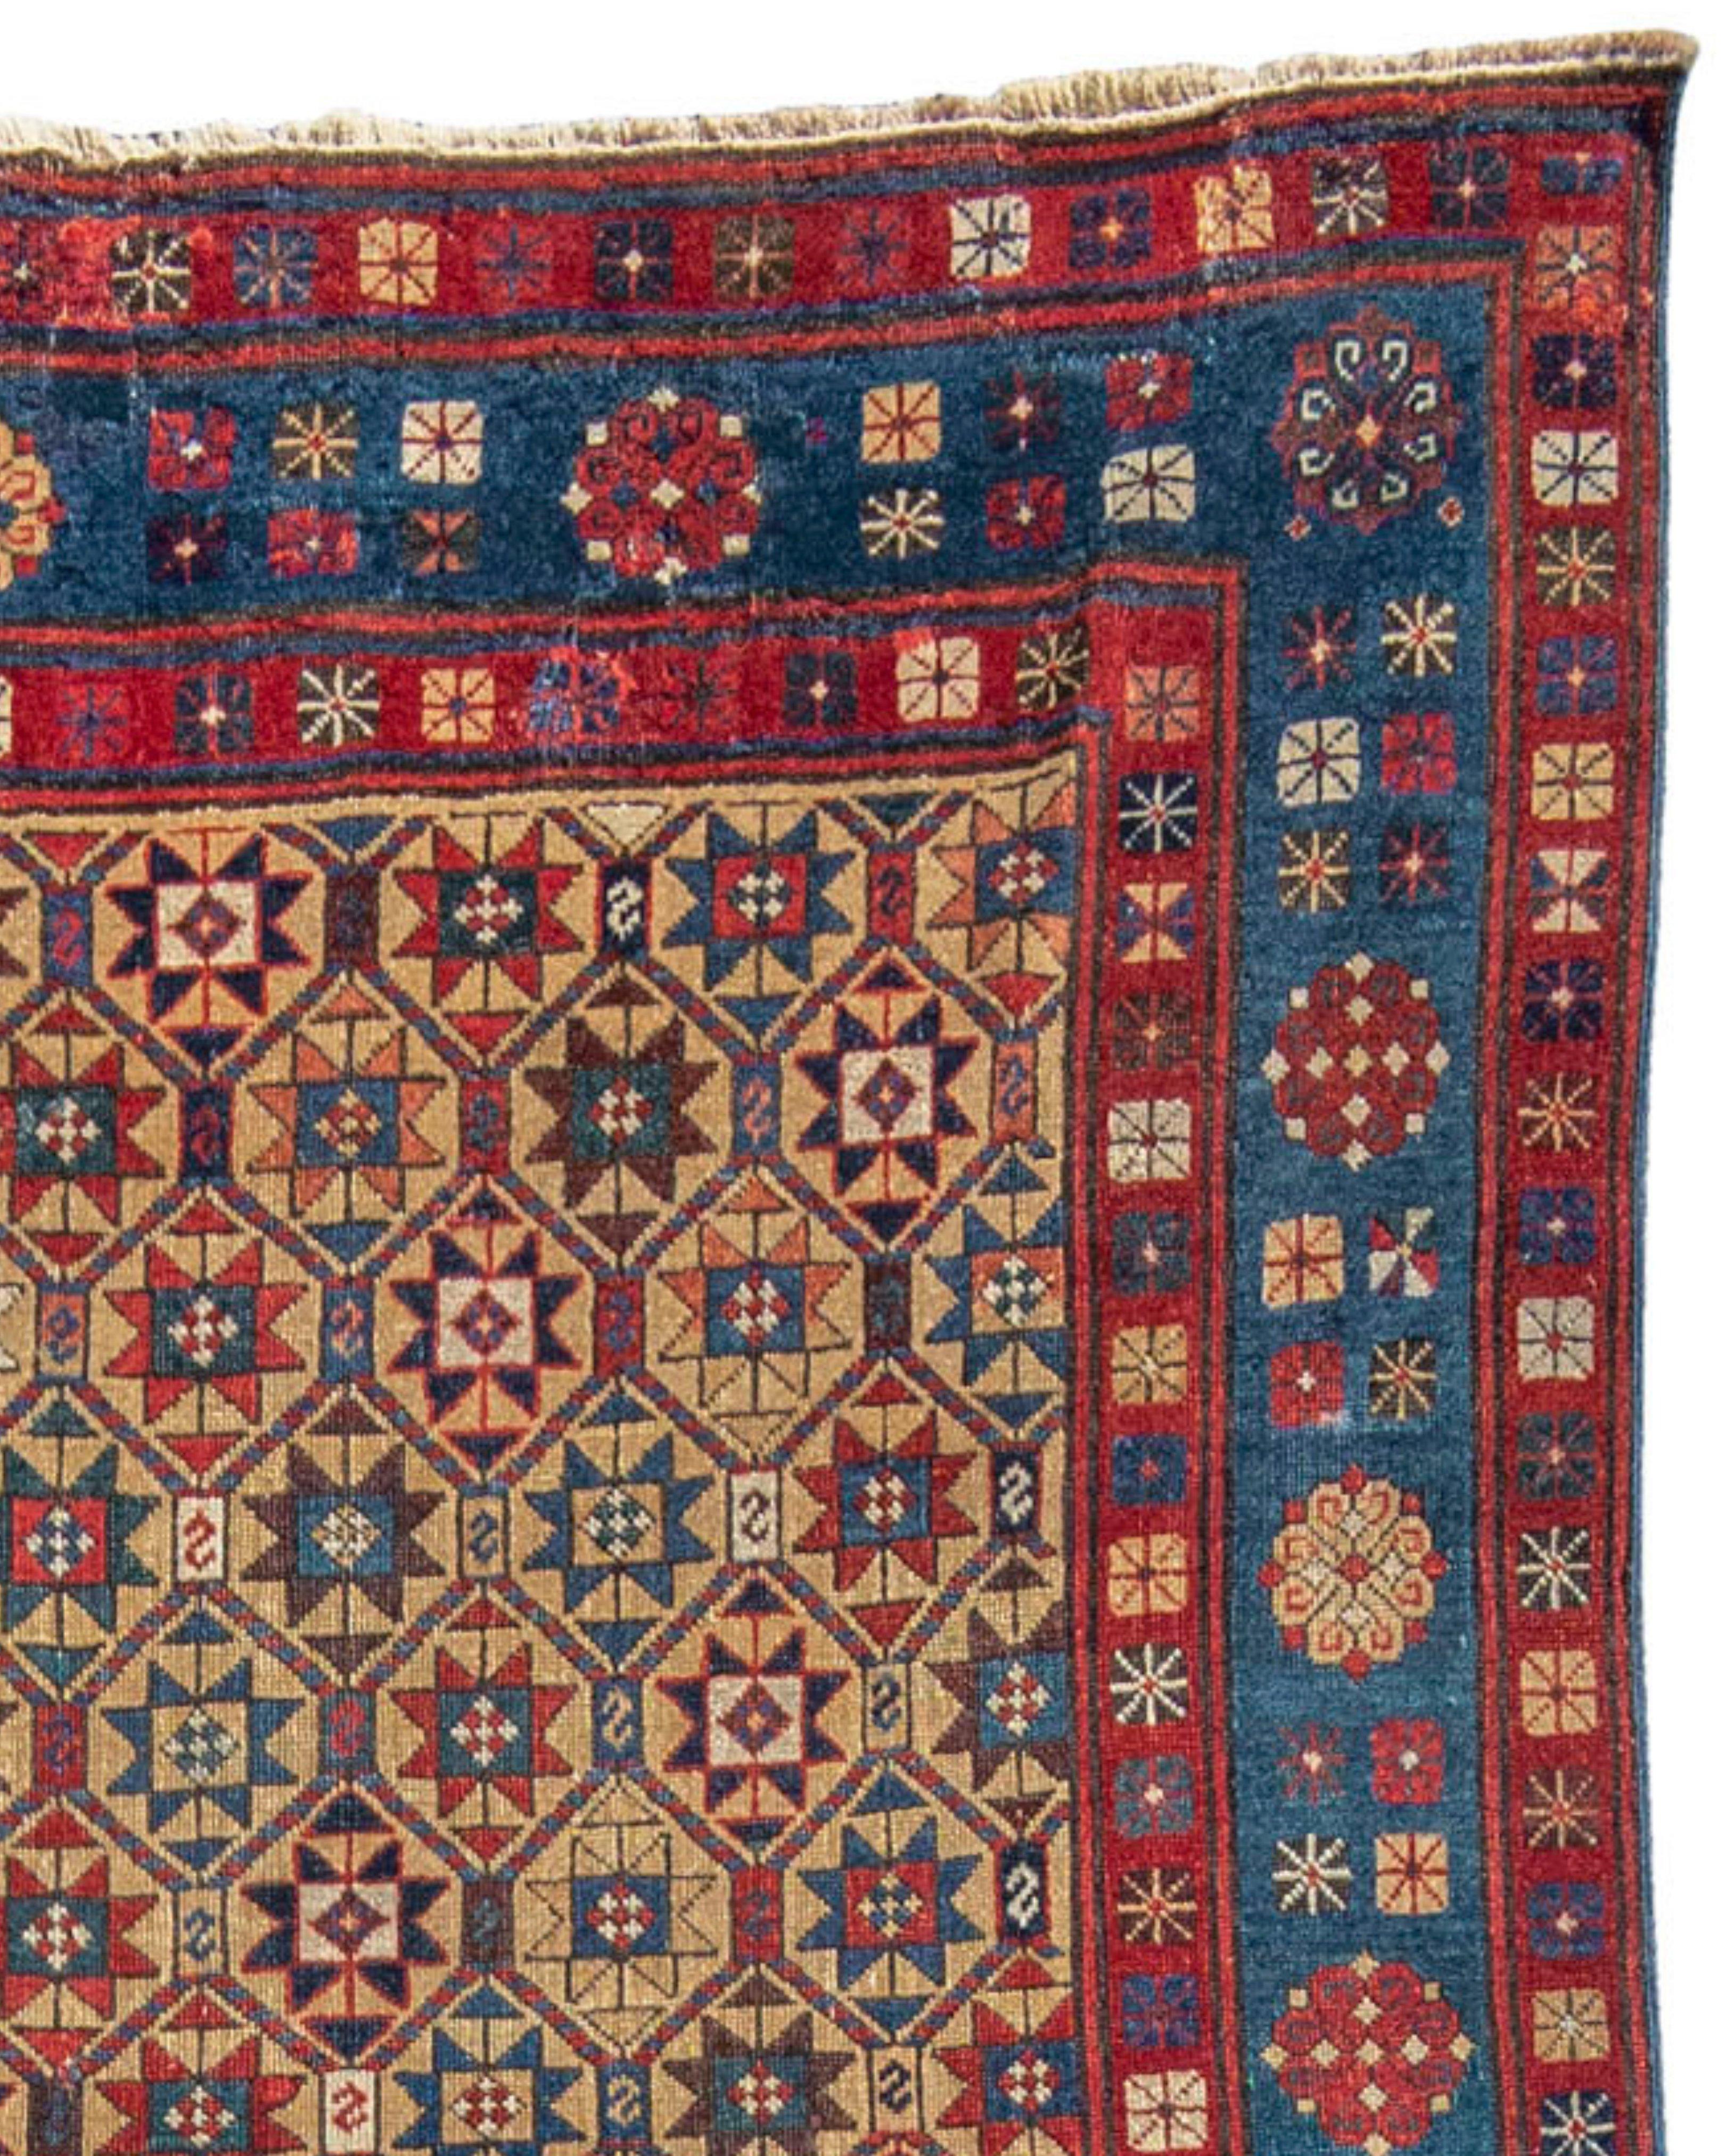 Antique Talish Runner Rug, Mid-19th Century

Additional Information:
Dimensions: 3'5